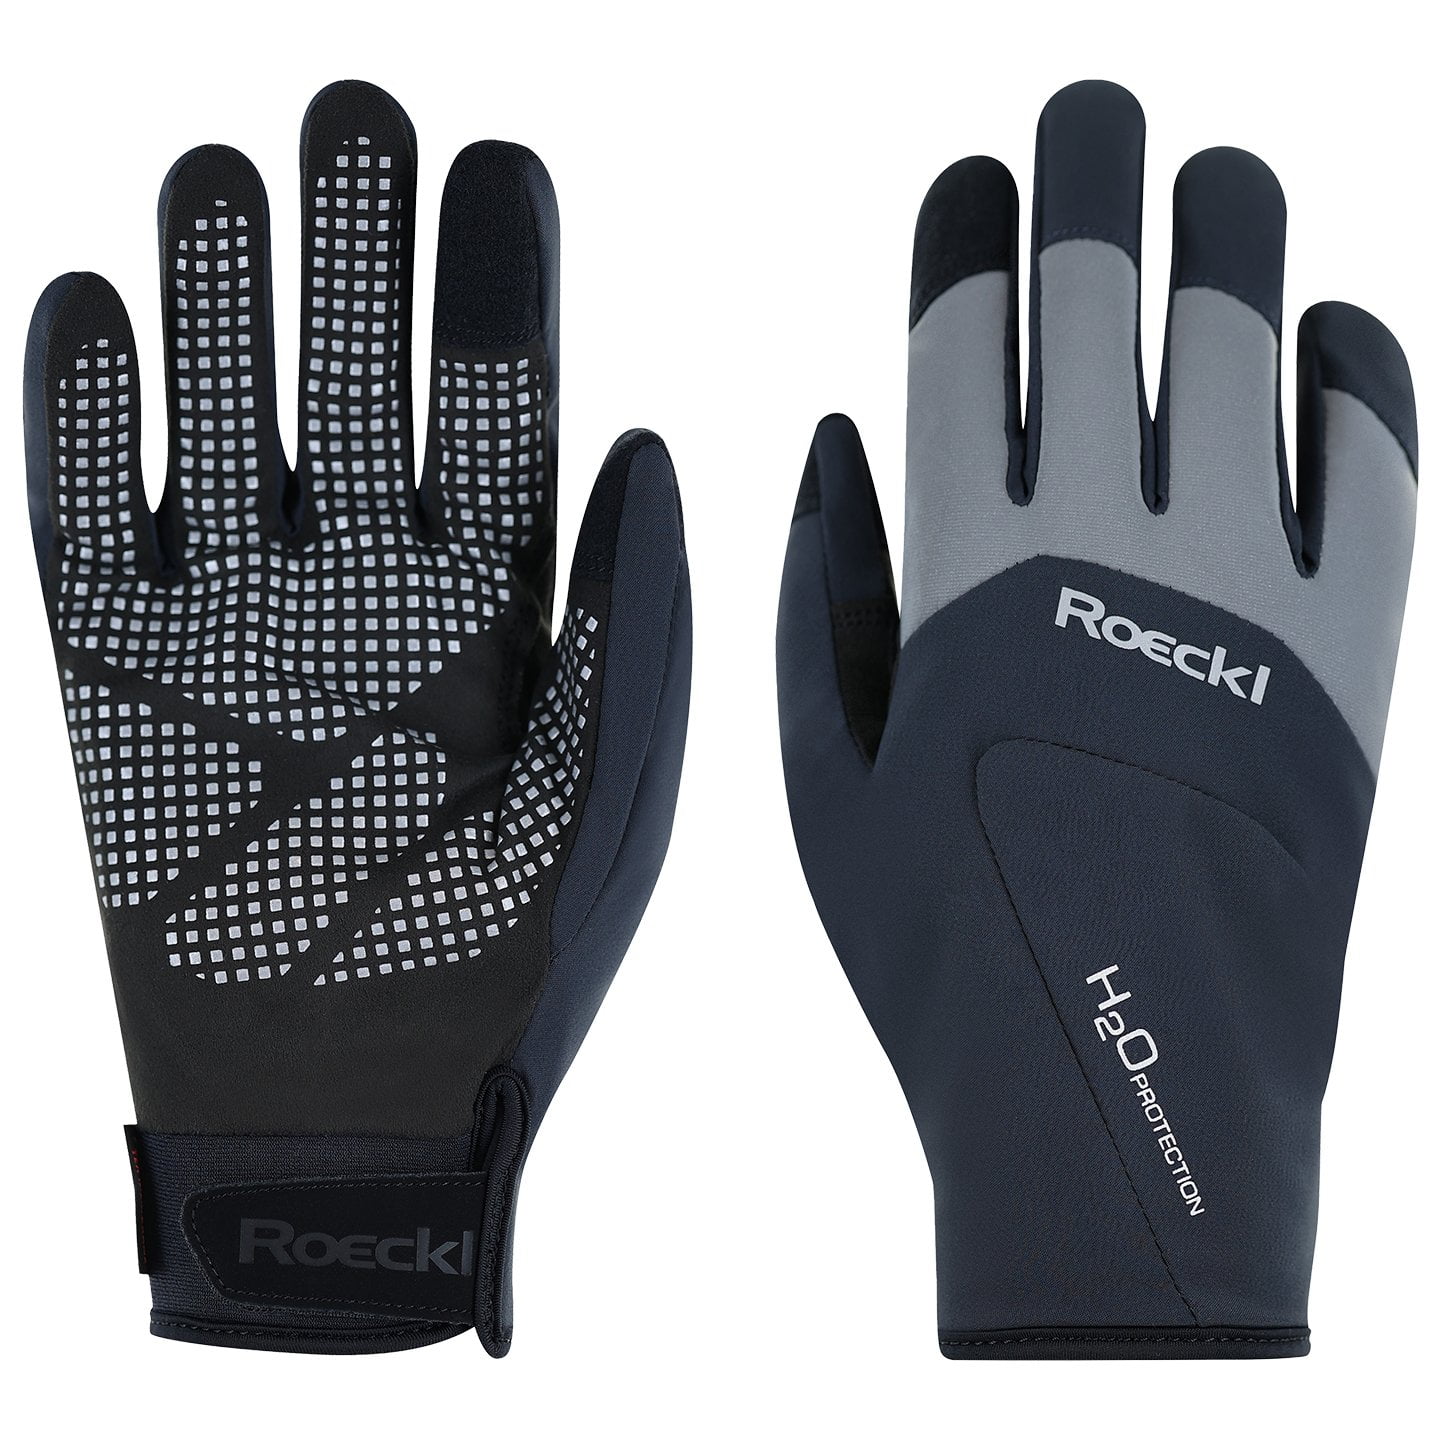 ROECKL Winter Gloves Rapallo Winter Cycling Gloves, for men, size 9,5, Bike gloves, Cycling wear